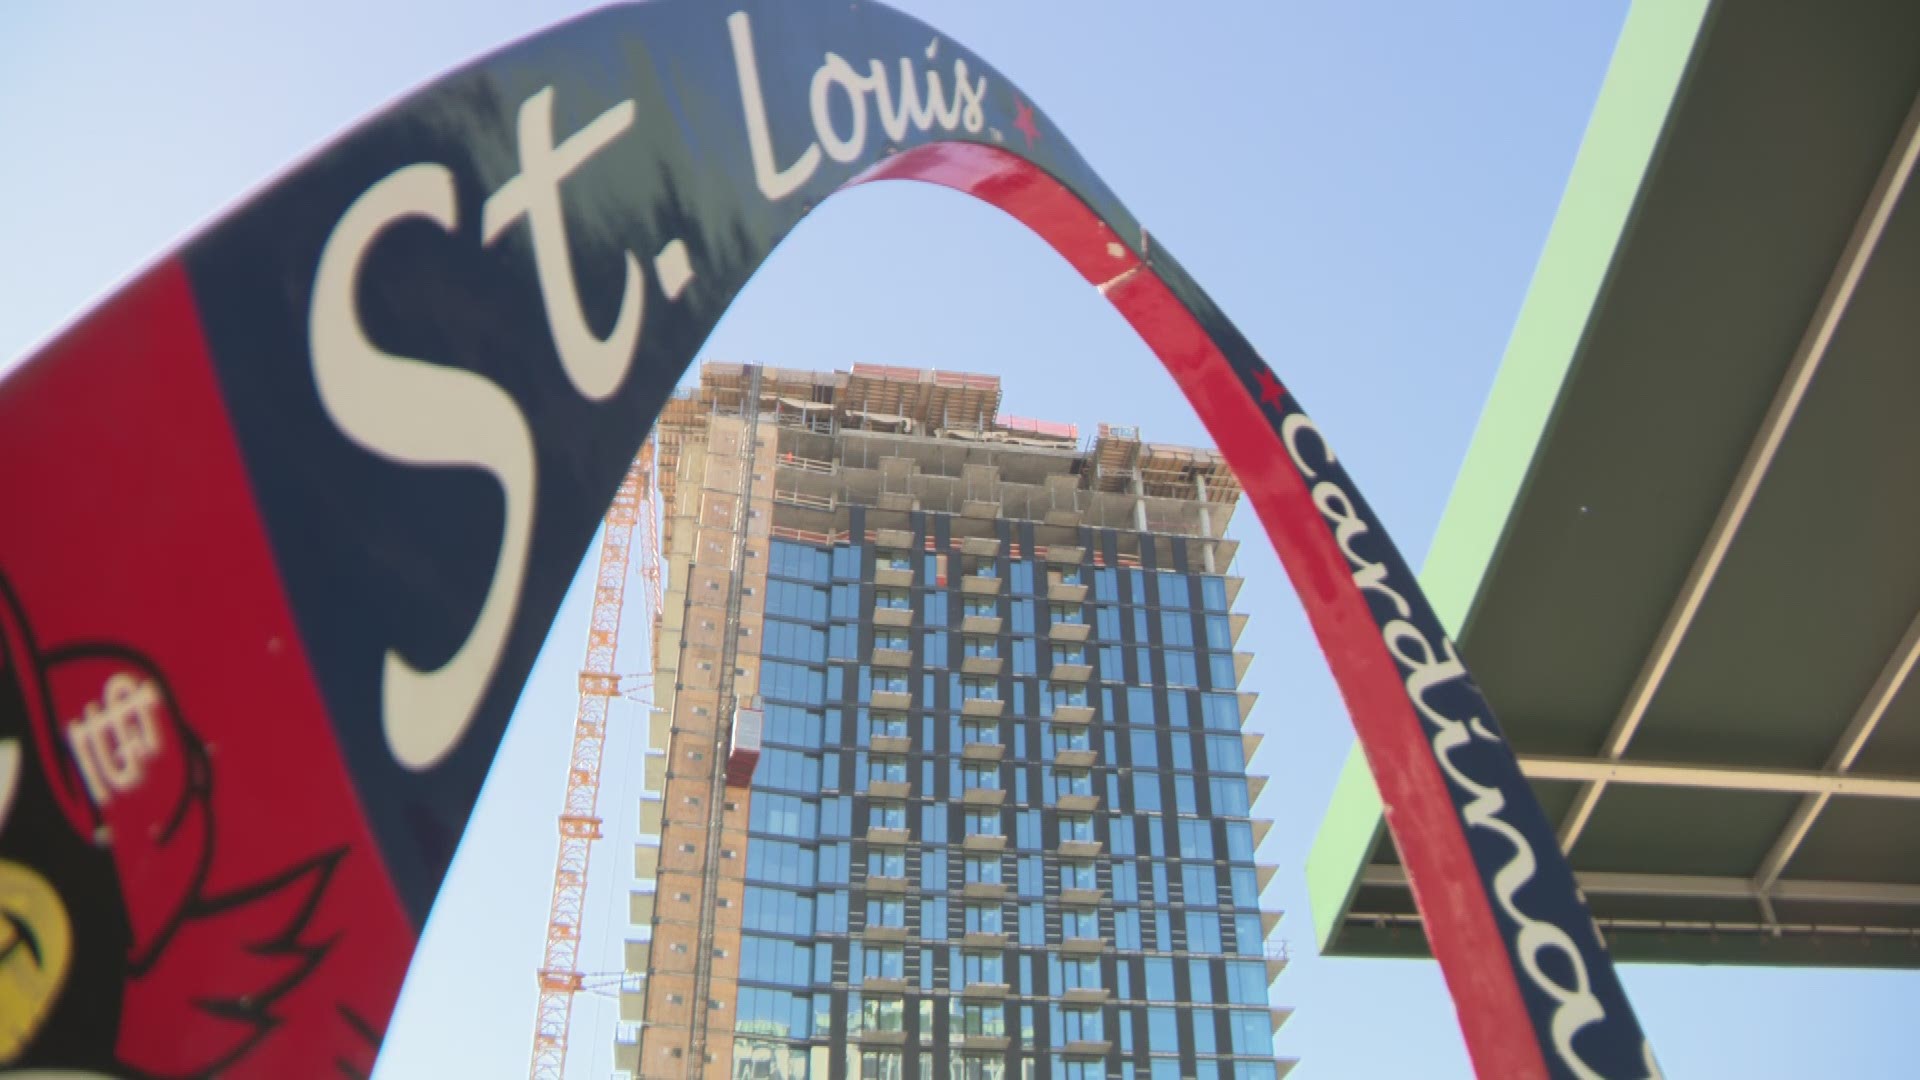 St. Louis' newest high-rise was built to sway instead of fall if an earthquake hits. It's that swaying that saved a log church during massive quakes in the 1800s.